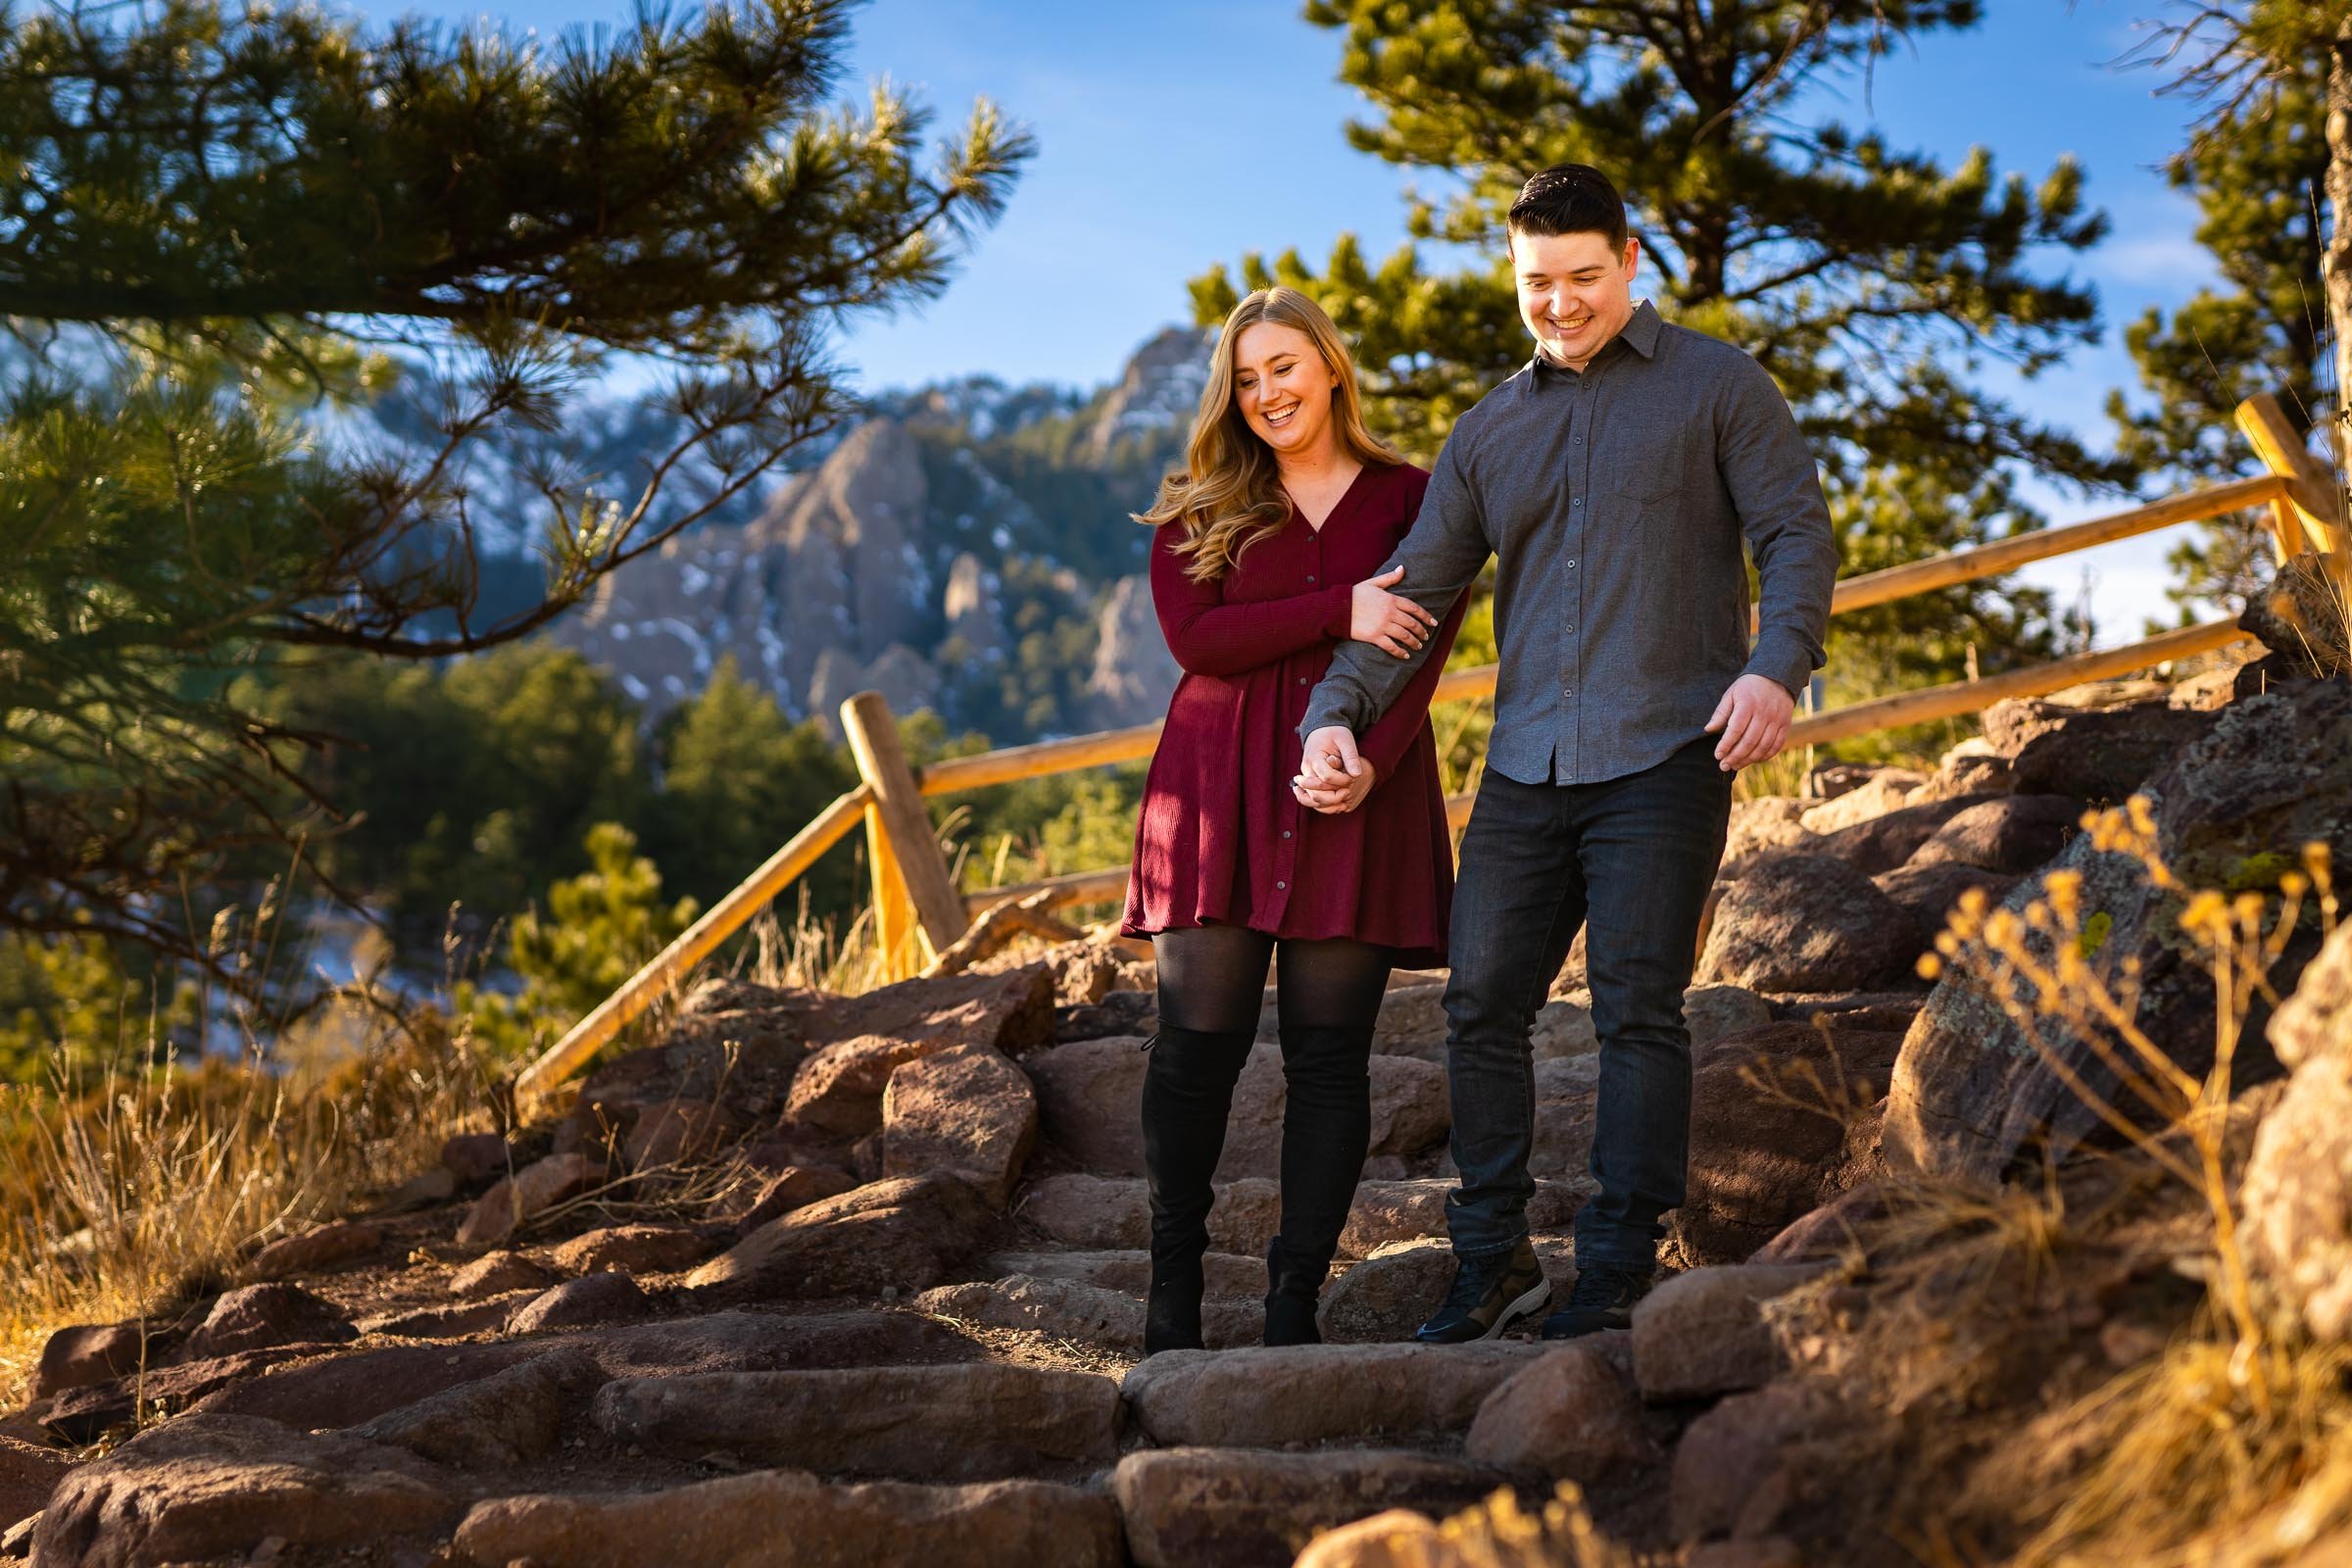 Engaged couple holds hands and walks down a path together, Mountain Engagement Photos, Engagement Session, Engagement Photos, Engagement Photos Inspiration, Engagement Photography, Engagement Photographer, Engagement Portraits, Winter Engagement Photos, Snow Engagement Photos, Boulder engagement session, Boulder engagement photos, Boulder engagement photography, Boulder engagement photographer, Boulder engagement inspiration, NCAR Trail engagement session, NCAR Trail engagement photos, NCAR Trail engagement photography, NCAR Trail engagement photographer, NCAR Trail engagement inspiration, Colorado engagement session, Colorado engagement photos, Colorado engagement photography, Colorado engagement photographer, Colorado engagement inspiration, Flatiron Engagement Photos